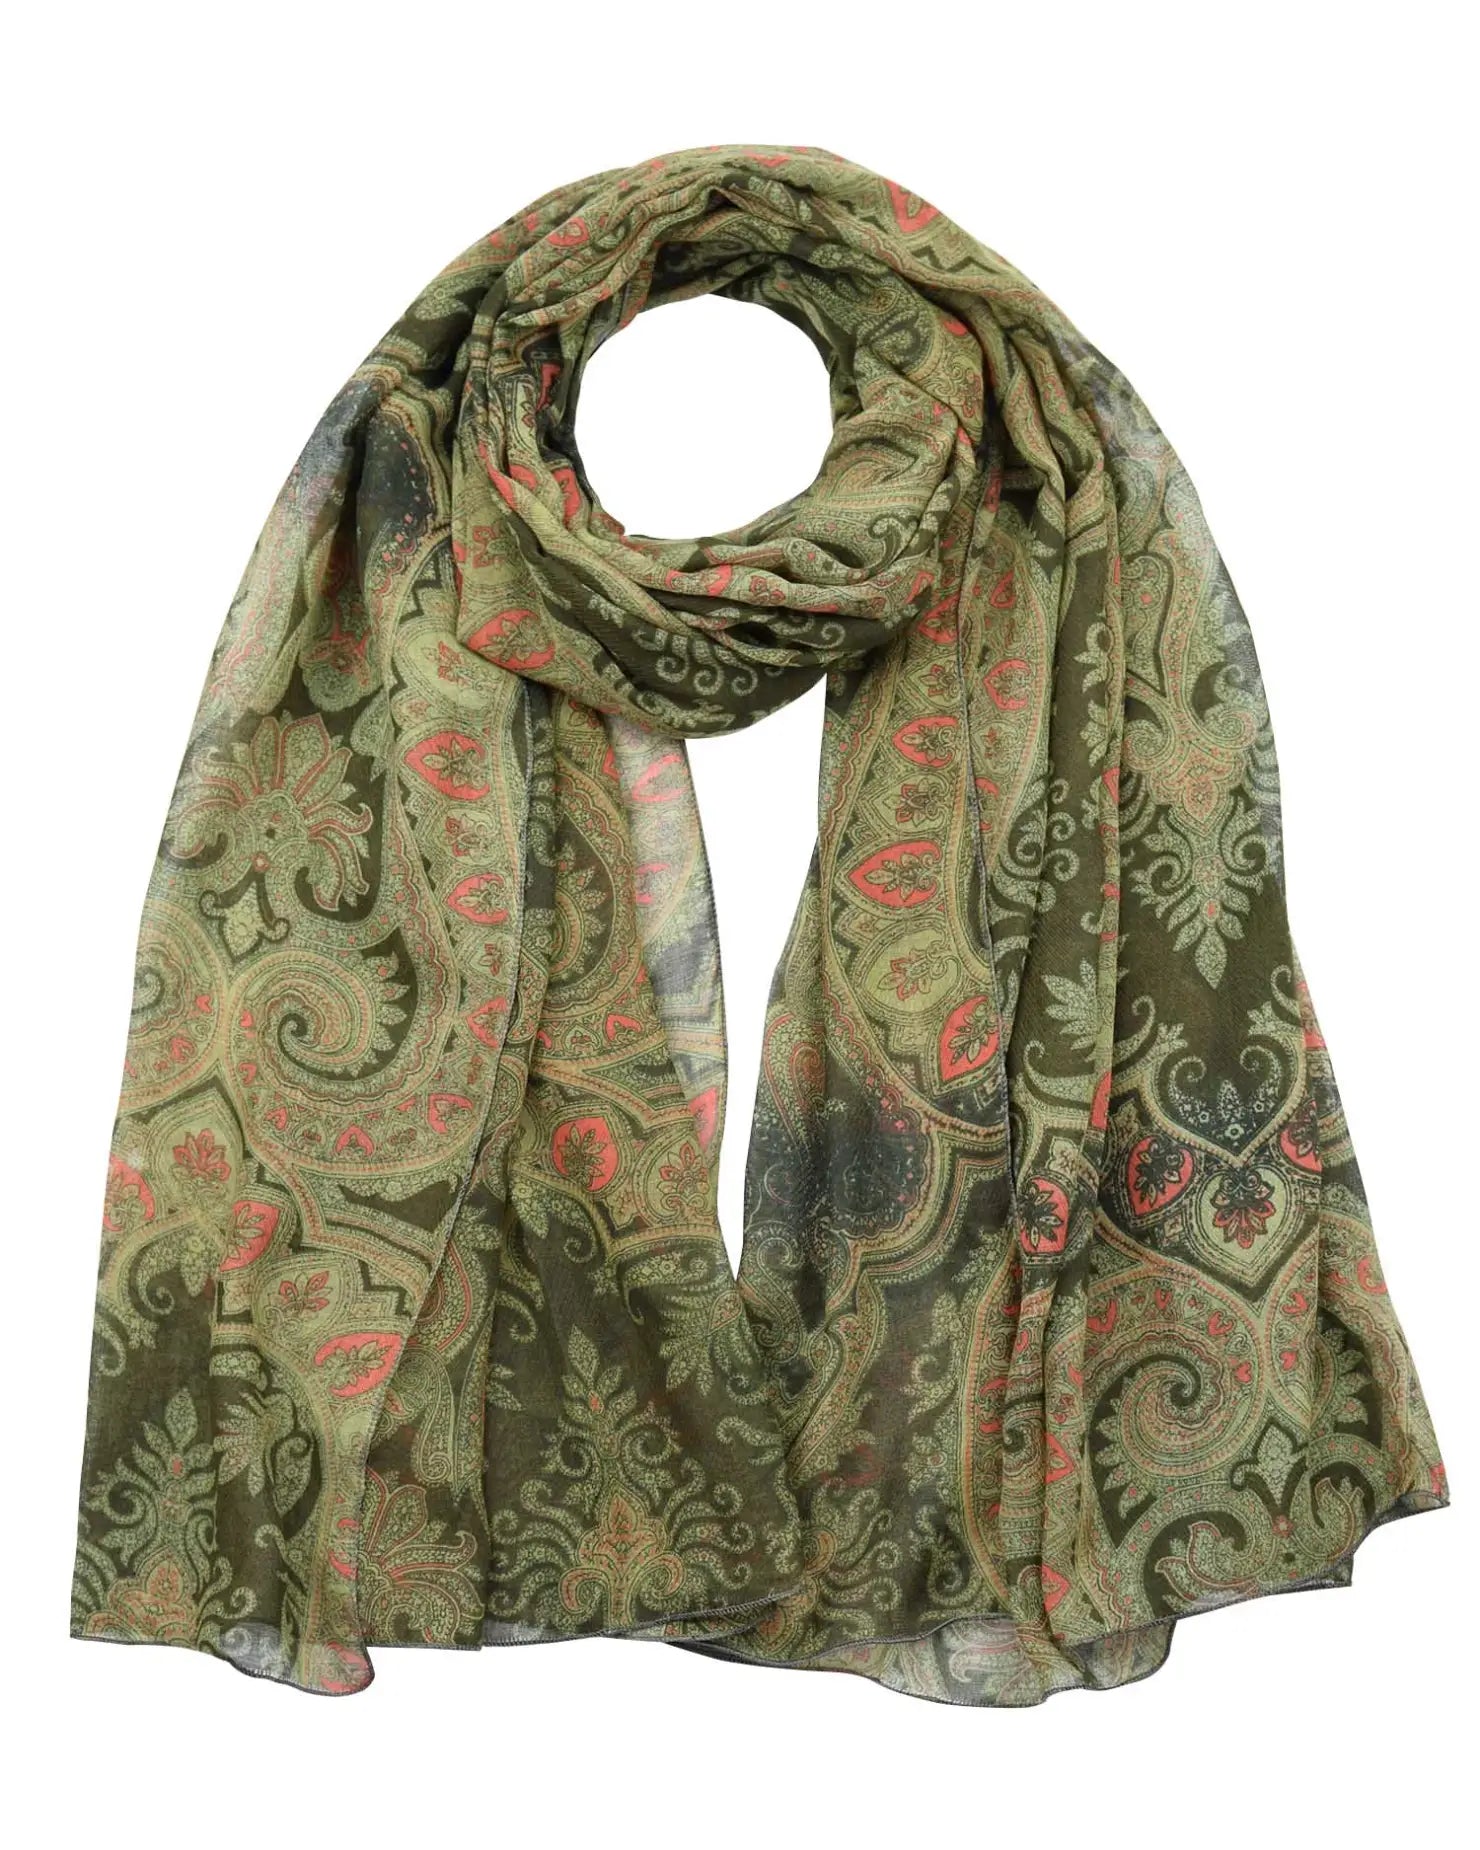 Green paisley floral maxi oversized Korean scarf with a paisley pattern